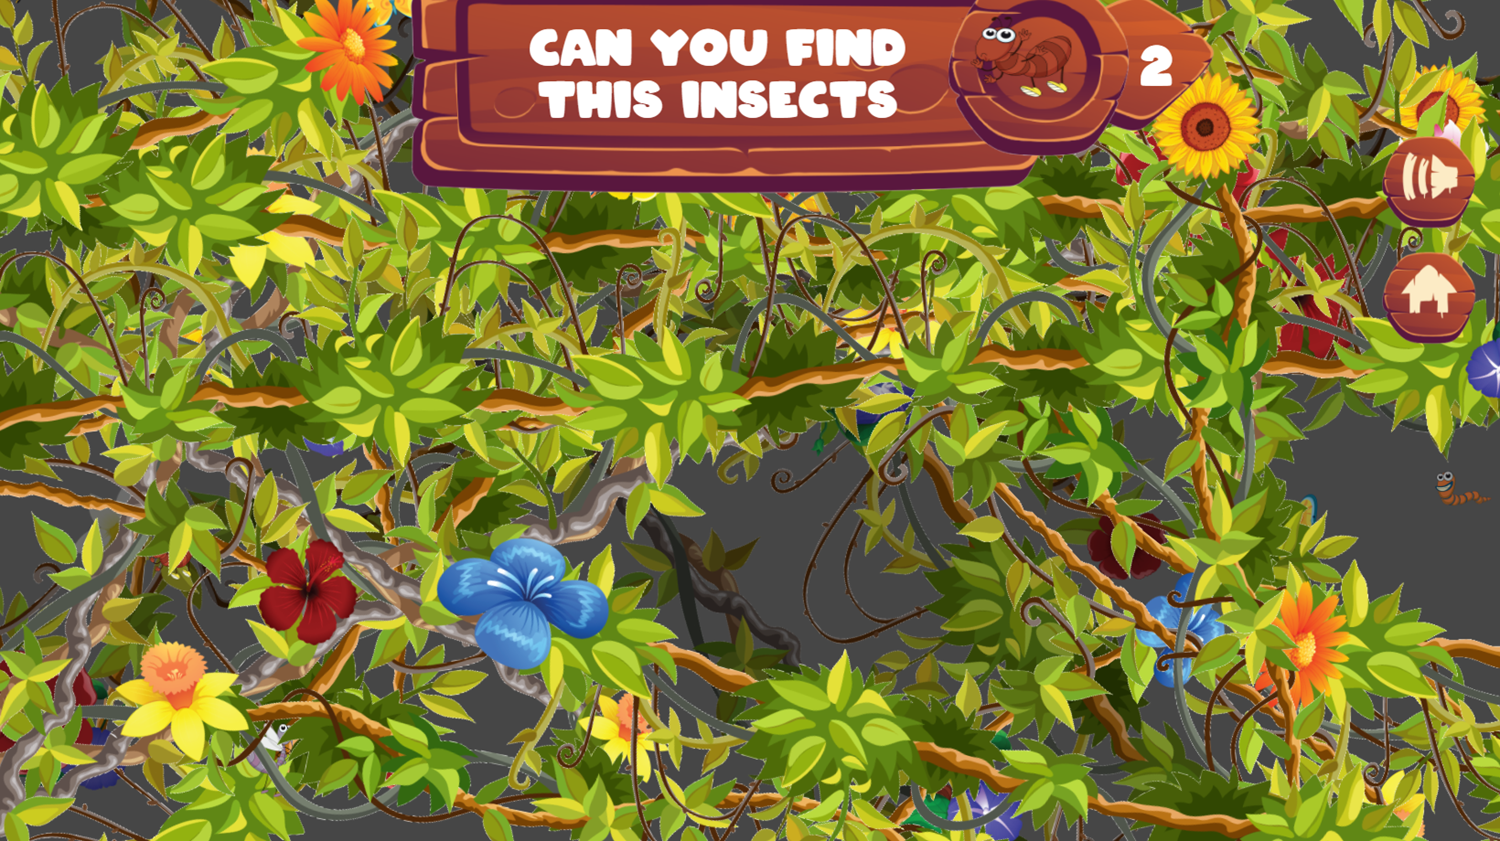 Funny Insects Game Screenshot.